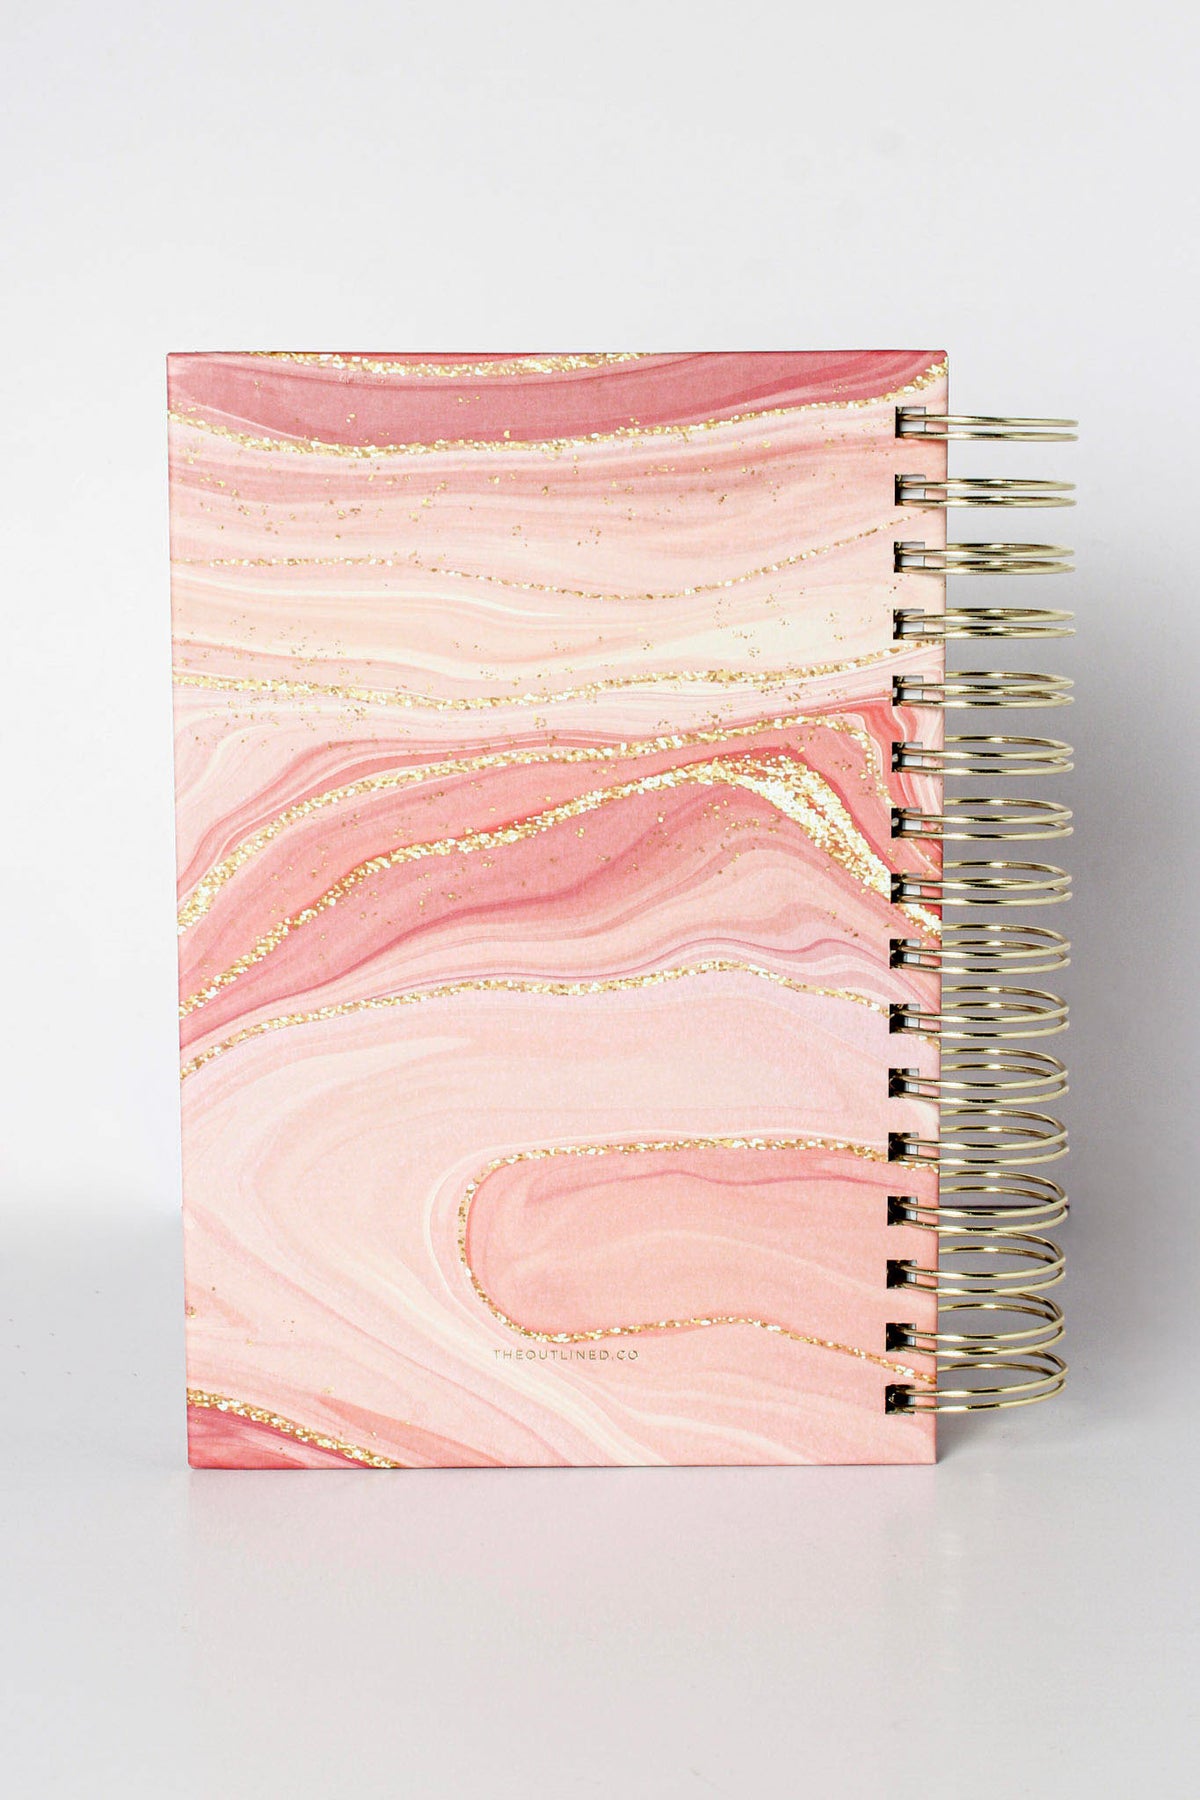 Spiral Notebook Journal - It's Already Yours